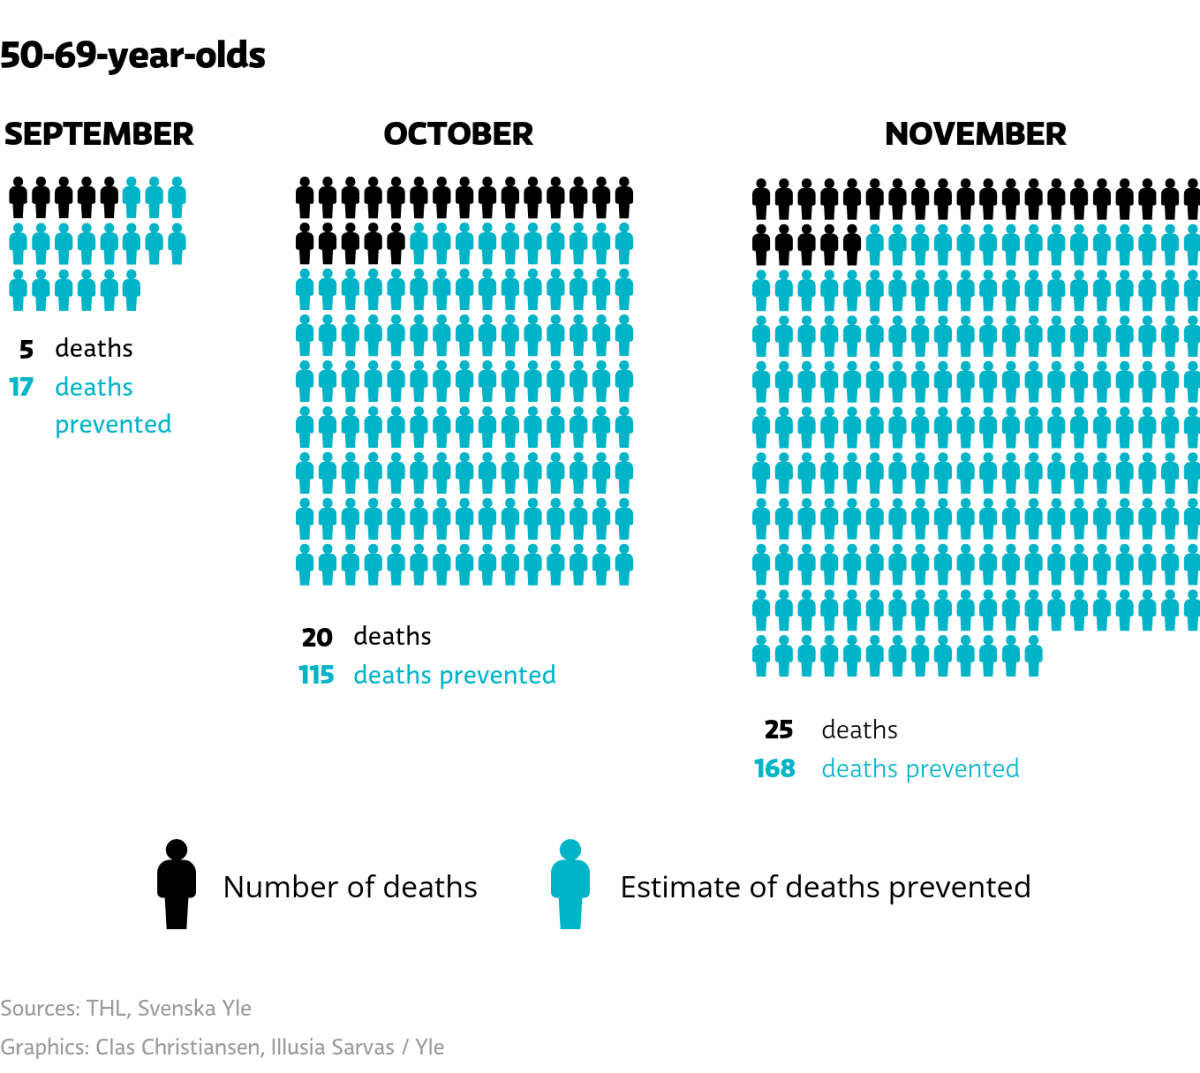 Graphic shows the amount of deaths and an estimate of deaths prevented by vaccination in the age group 50-69.